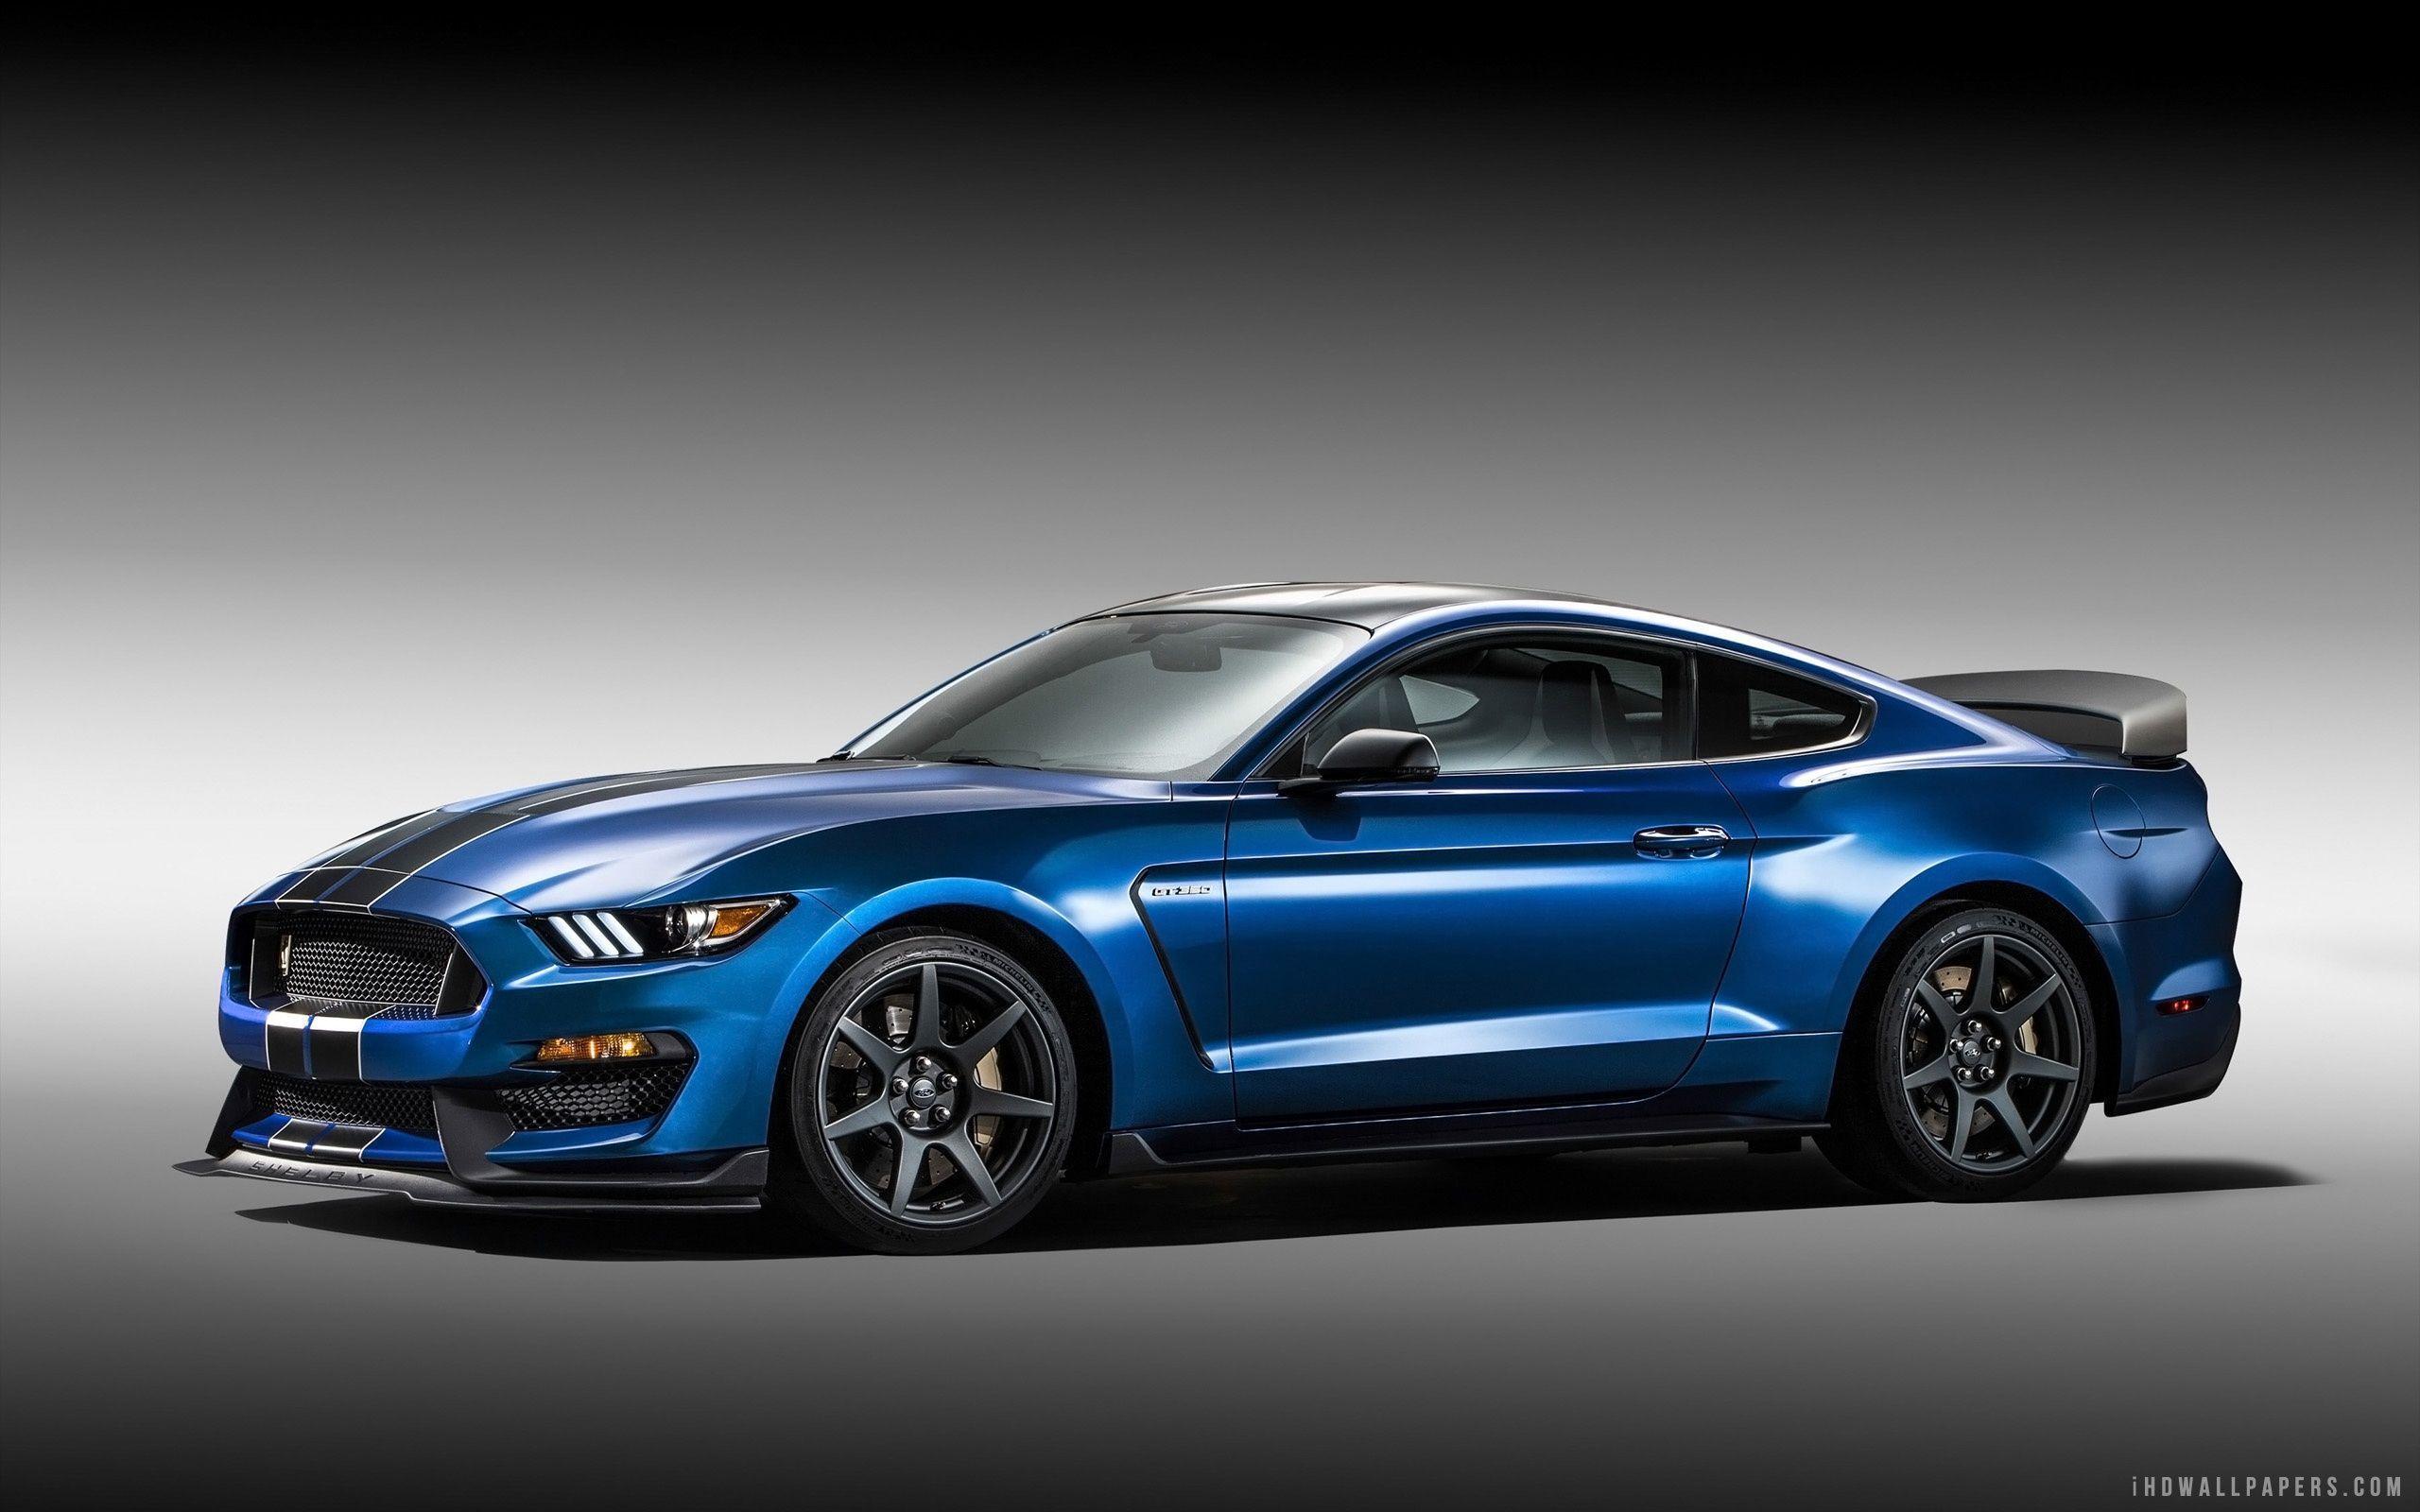 2016 Shelby Gt350 Wallpaper - Ford Mustang Car 2016 , HD Wallpaper & Backgrounds